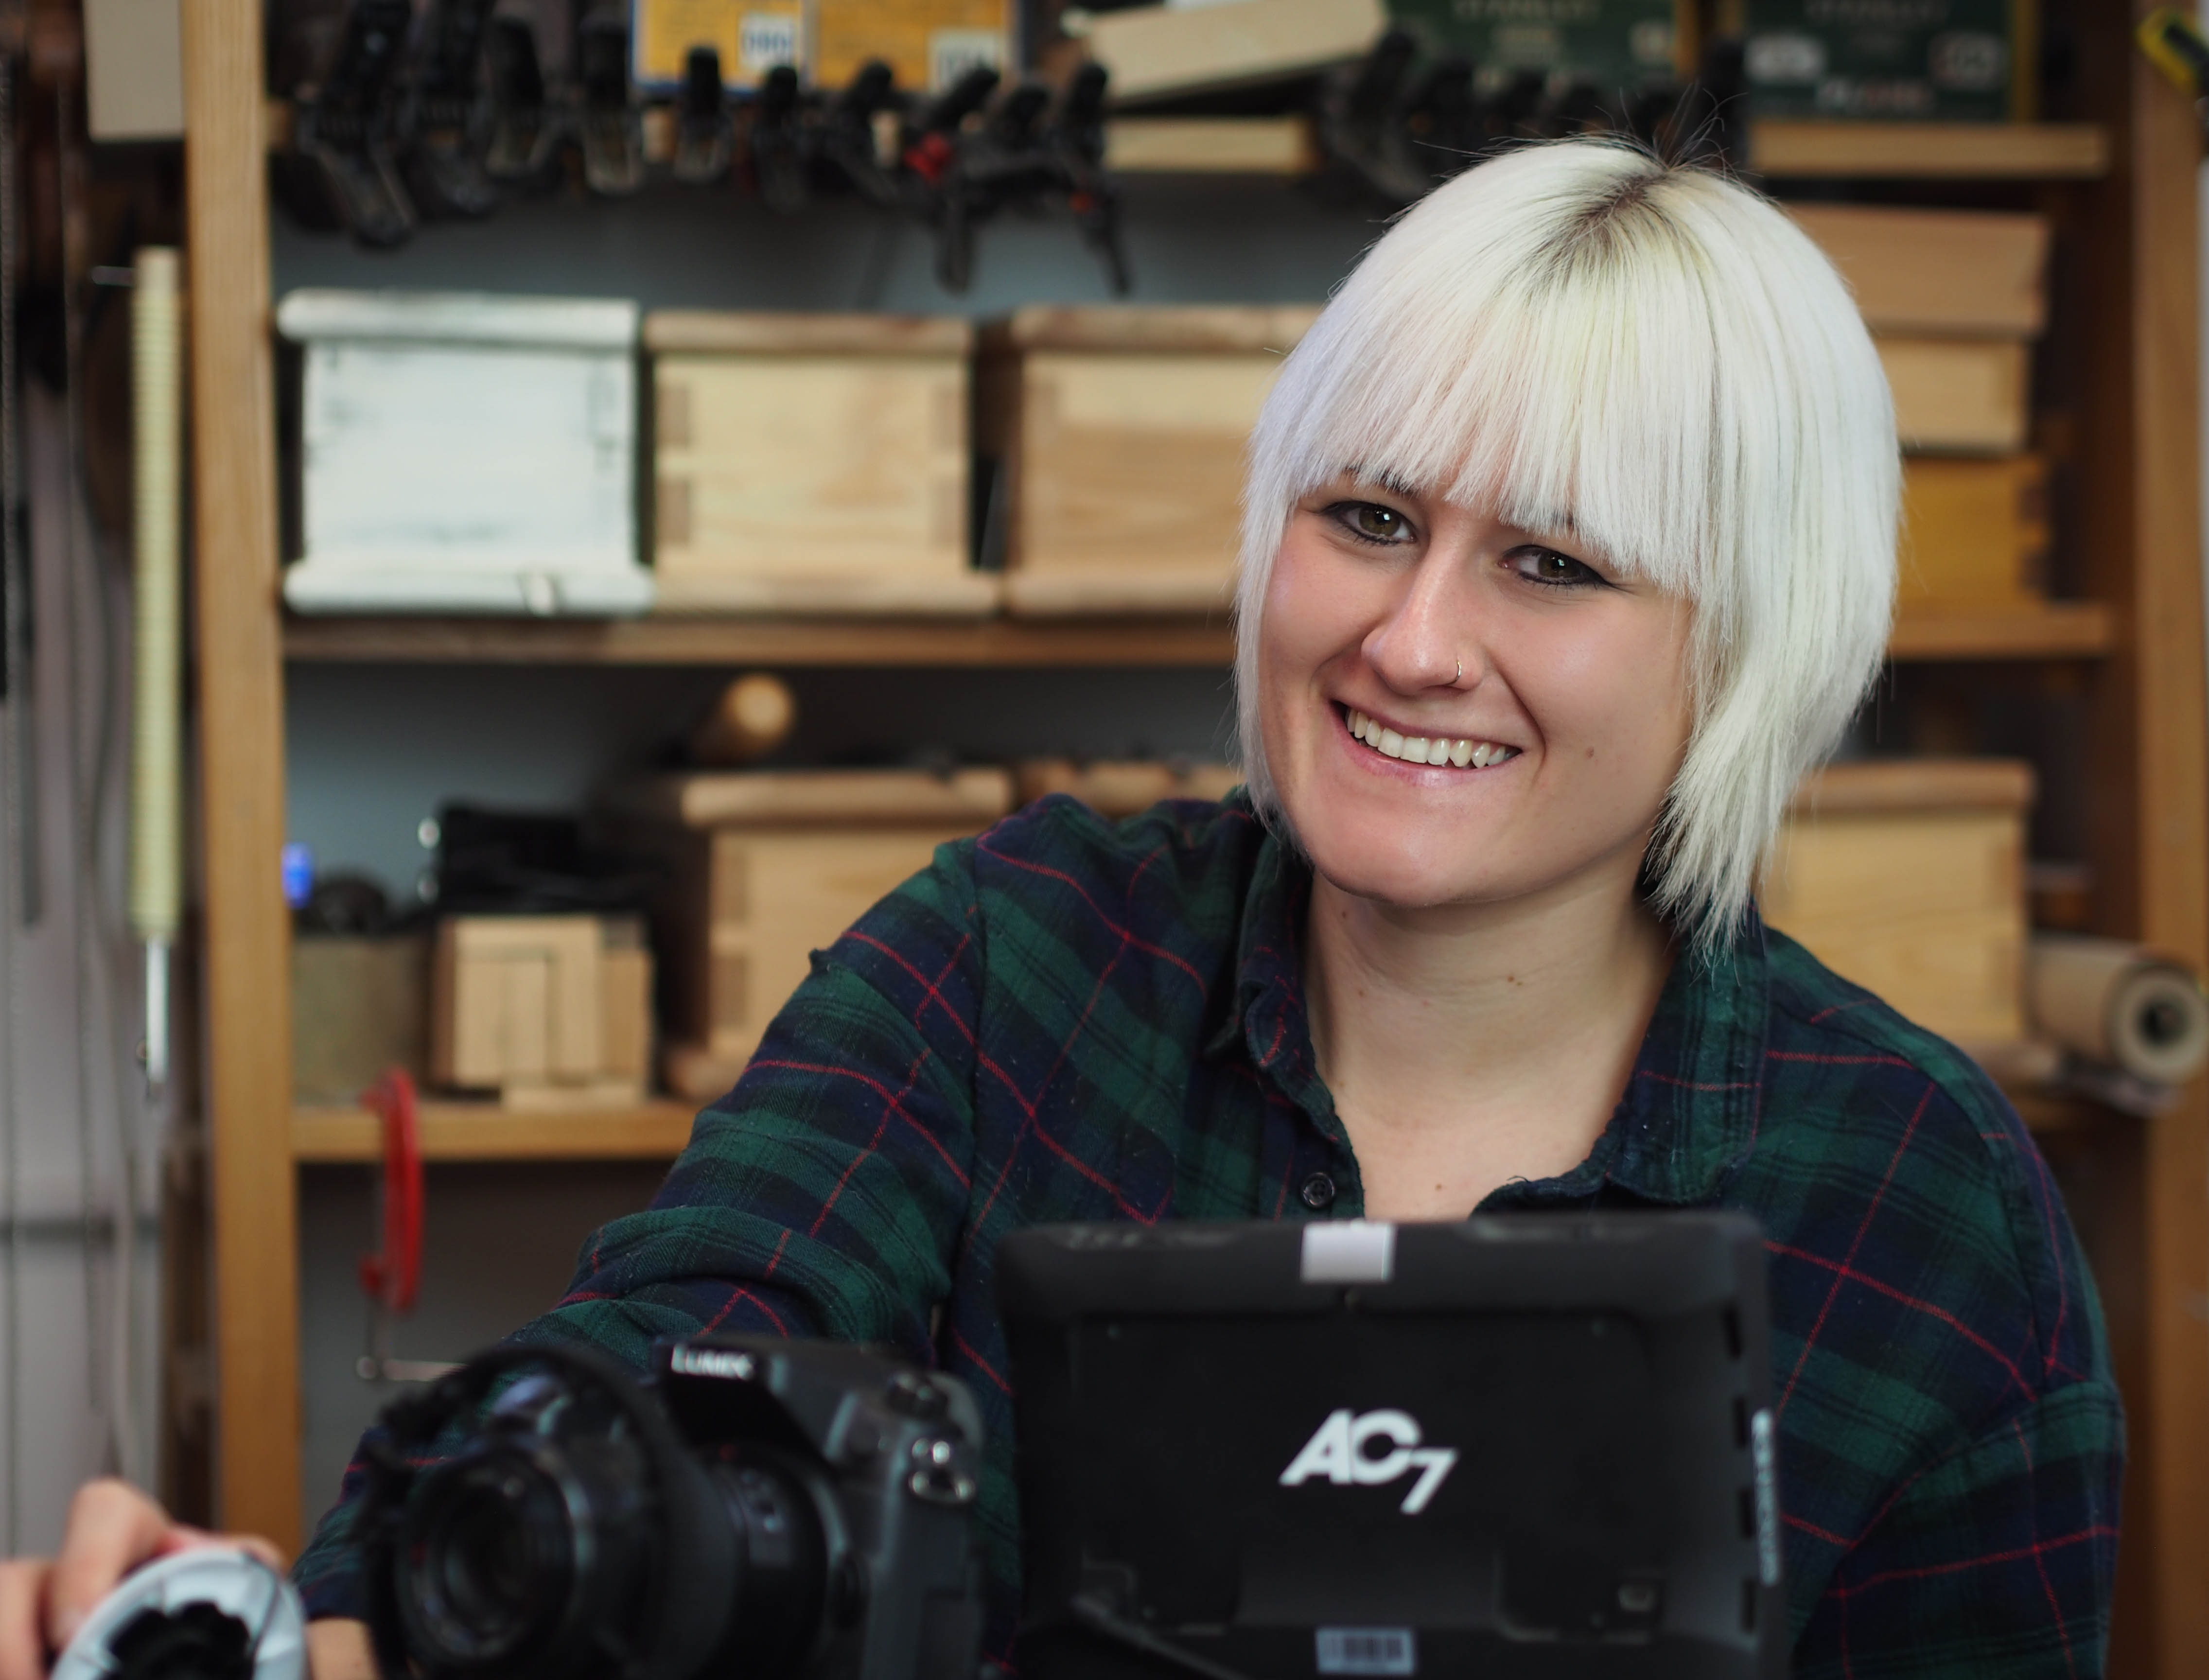 Eloise, Videographer at Woodworking Masterclasses